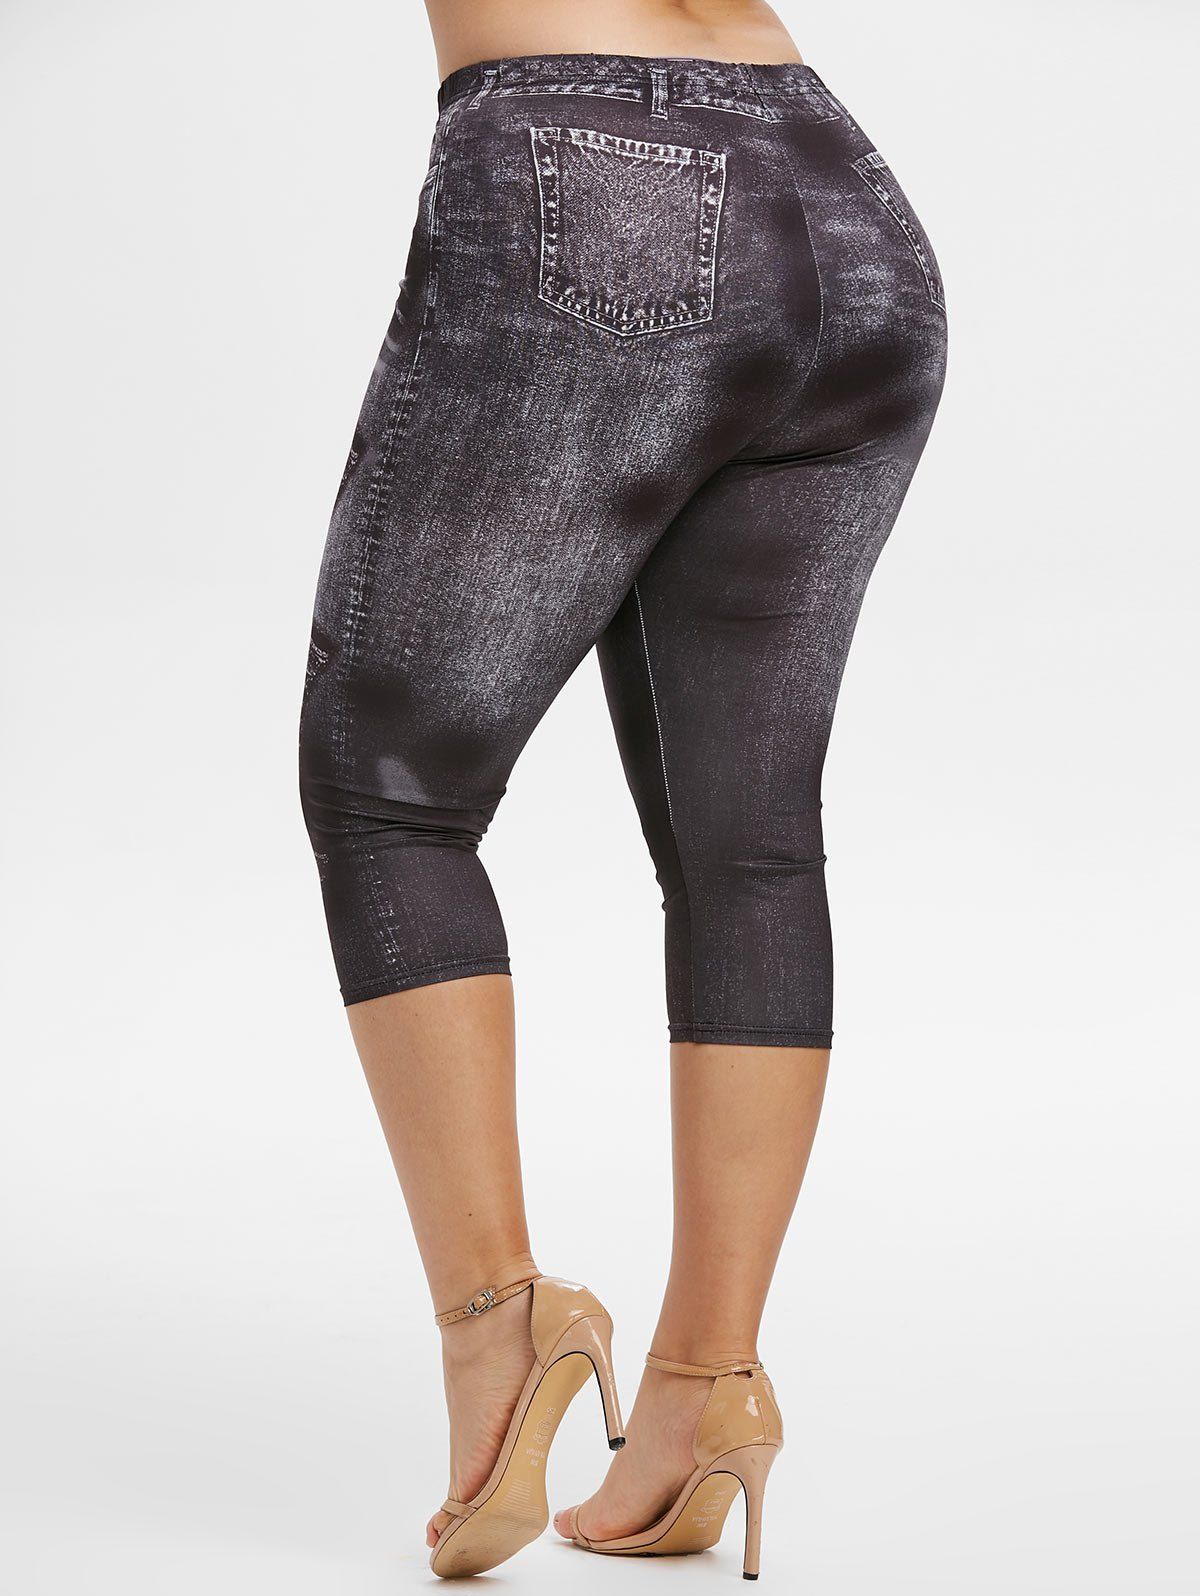 26 OFF 2020 Plus Size 3D Ripped Jean Print Cropped Leggings In BLACK